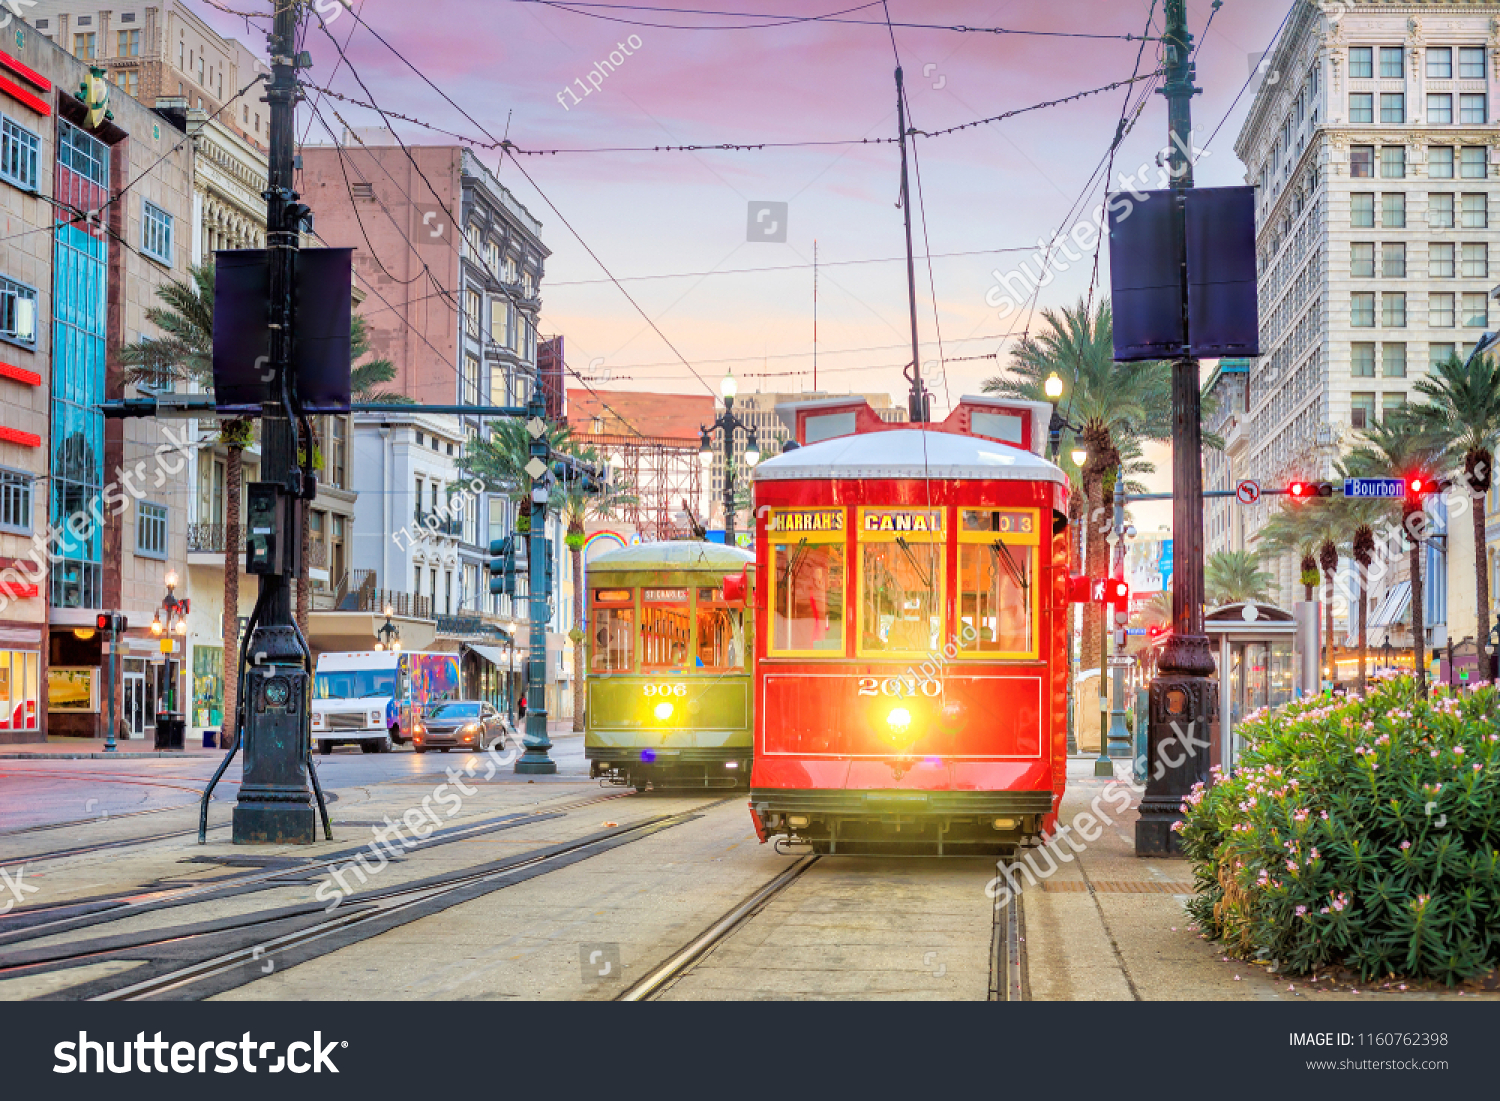 Streetcar in downtown New Orleans, USA at twilight #1160762398